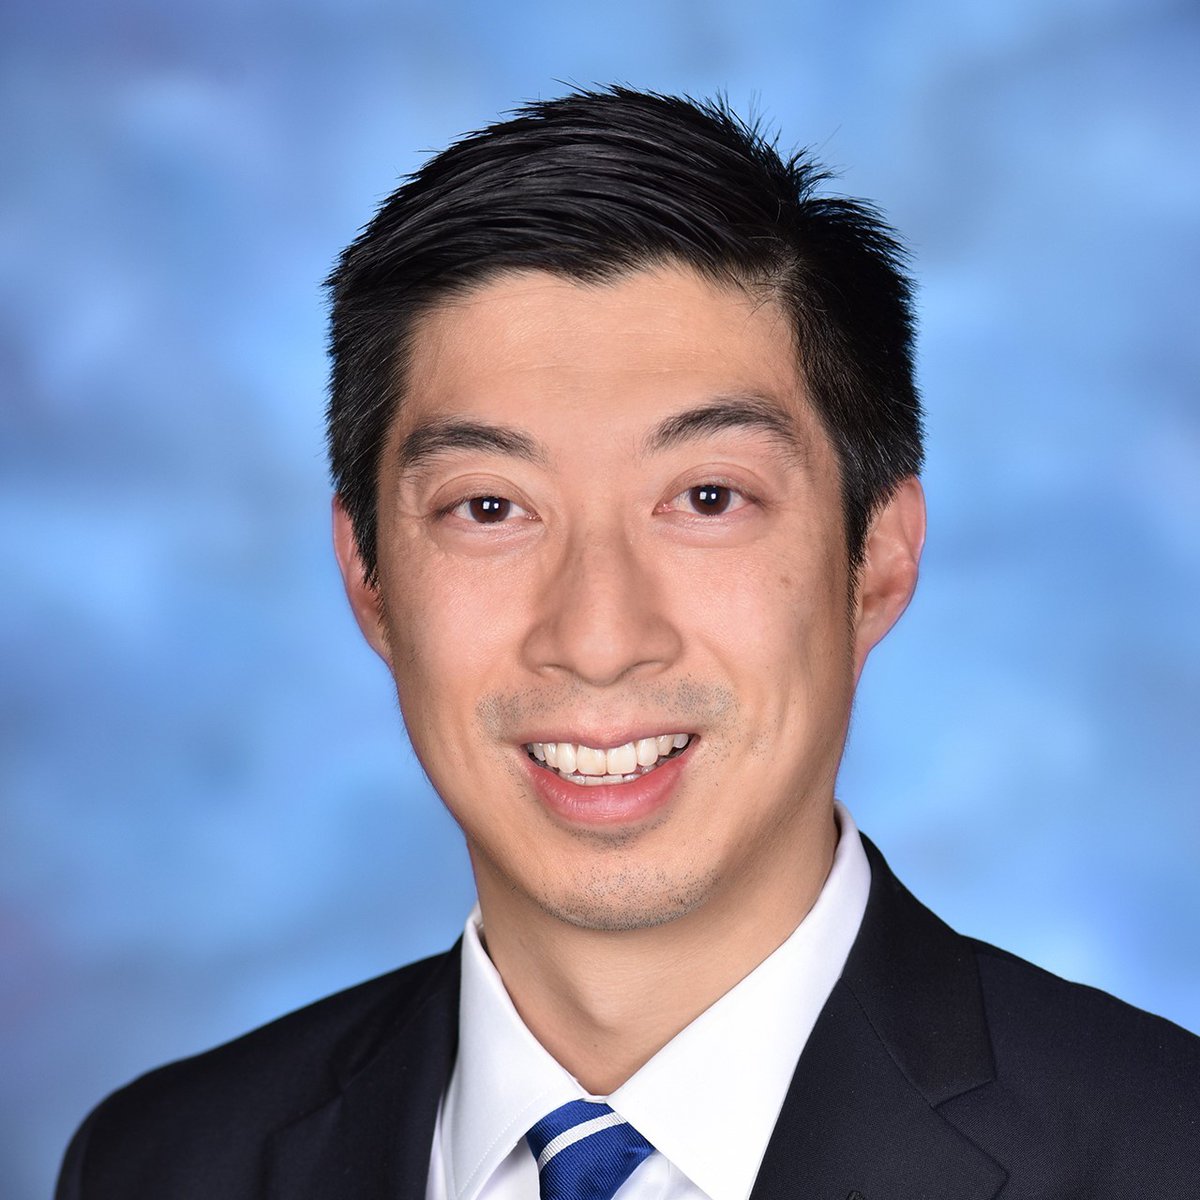 Edward Chang, MD, FAAOS is a Board Certified, Fellowship Trained Orthopaedic Sports Medicine Surgeon at @InovaHealth and a member of the @ARROWDashboard steering committee. His research interests include outcomes after joint reconstruction. Learn more: edwardschangmd.com